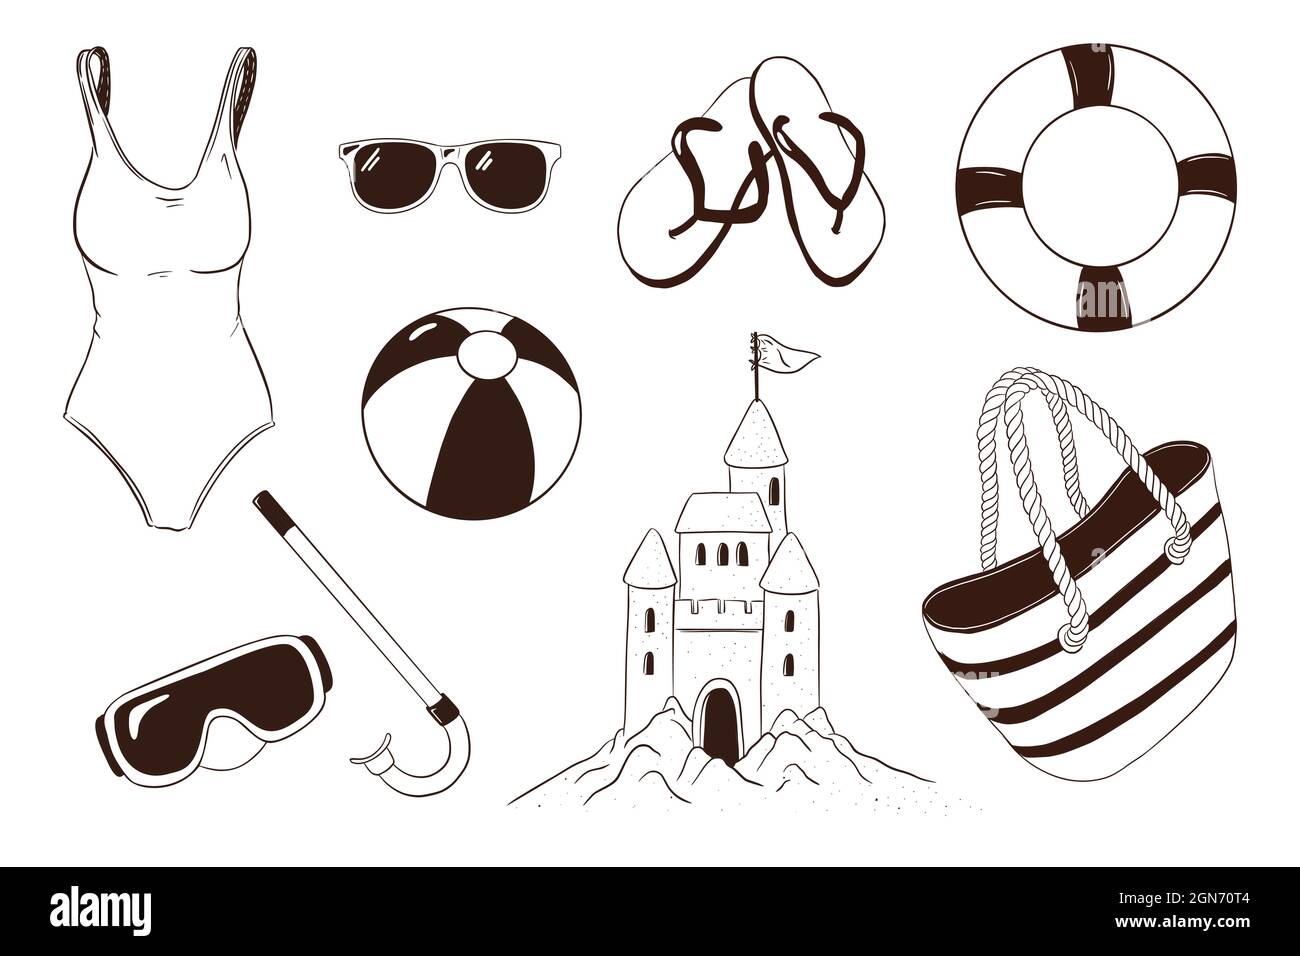 Summer Leisure Items Collection. Hand Drawn sea vacation activities accessories. Snorkel goggles, swimsuit, swimming ring, beach ball, flip flops, beach bag, sand castle and sunglasses. Premium Vector Stock Vector